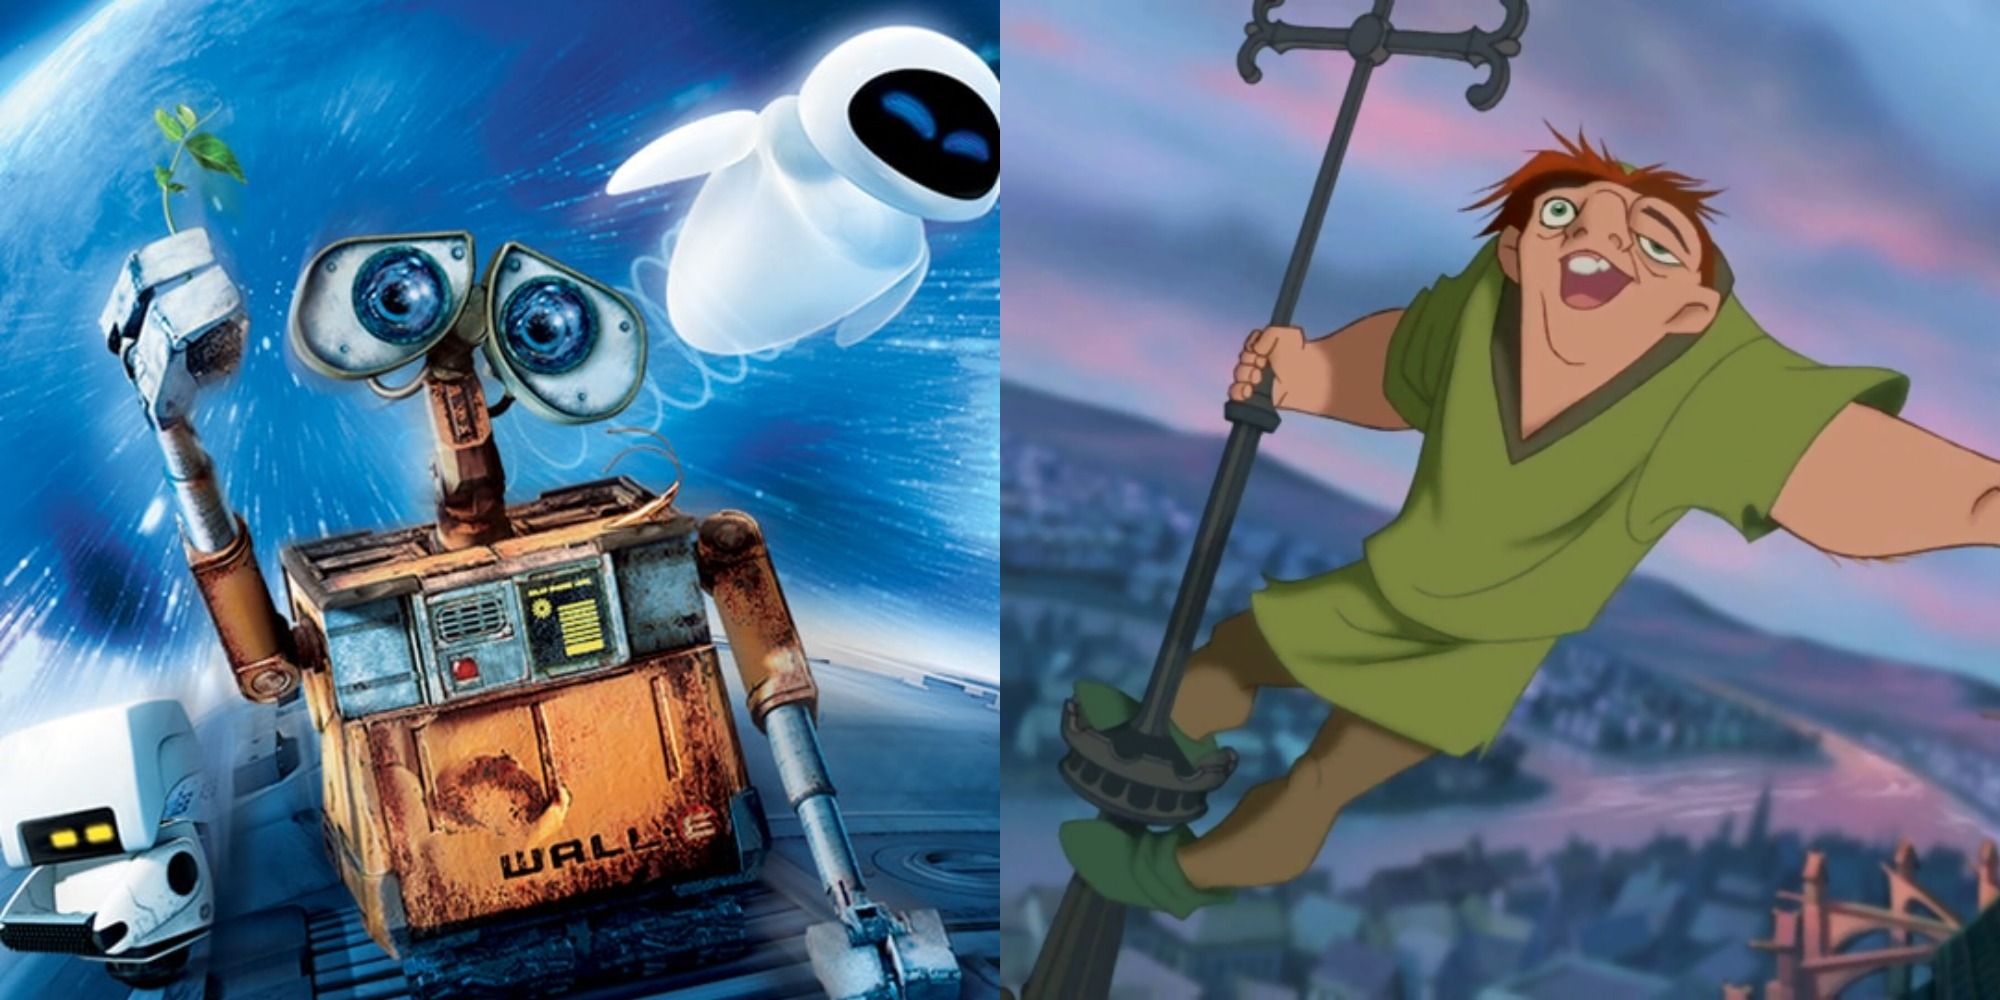 Split image showing a poster for Wall-E and Quasimodo singing in The Hunchback of Notre Dame